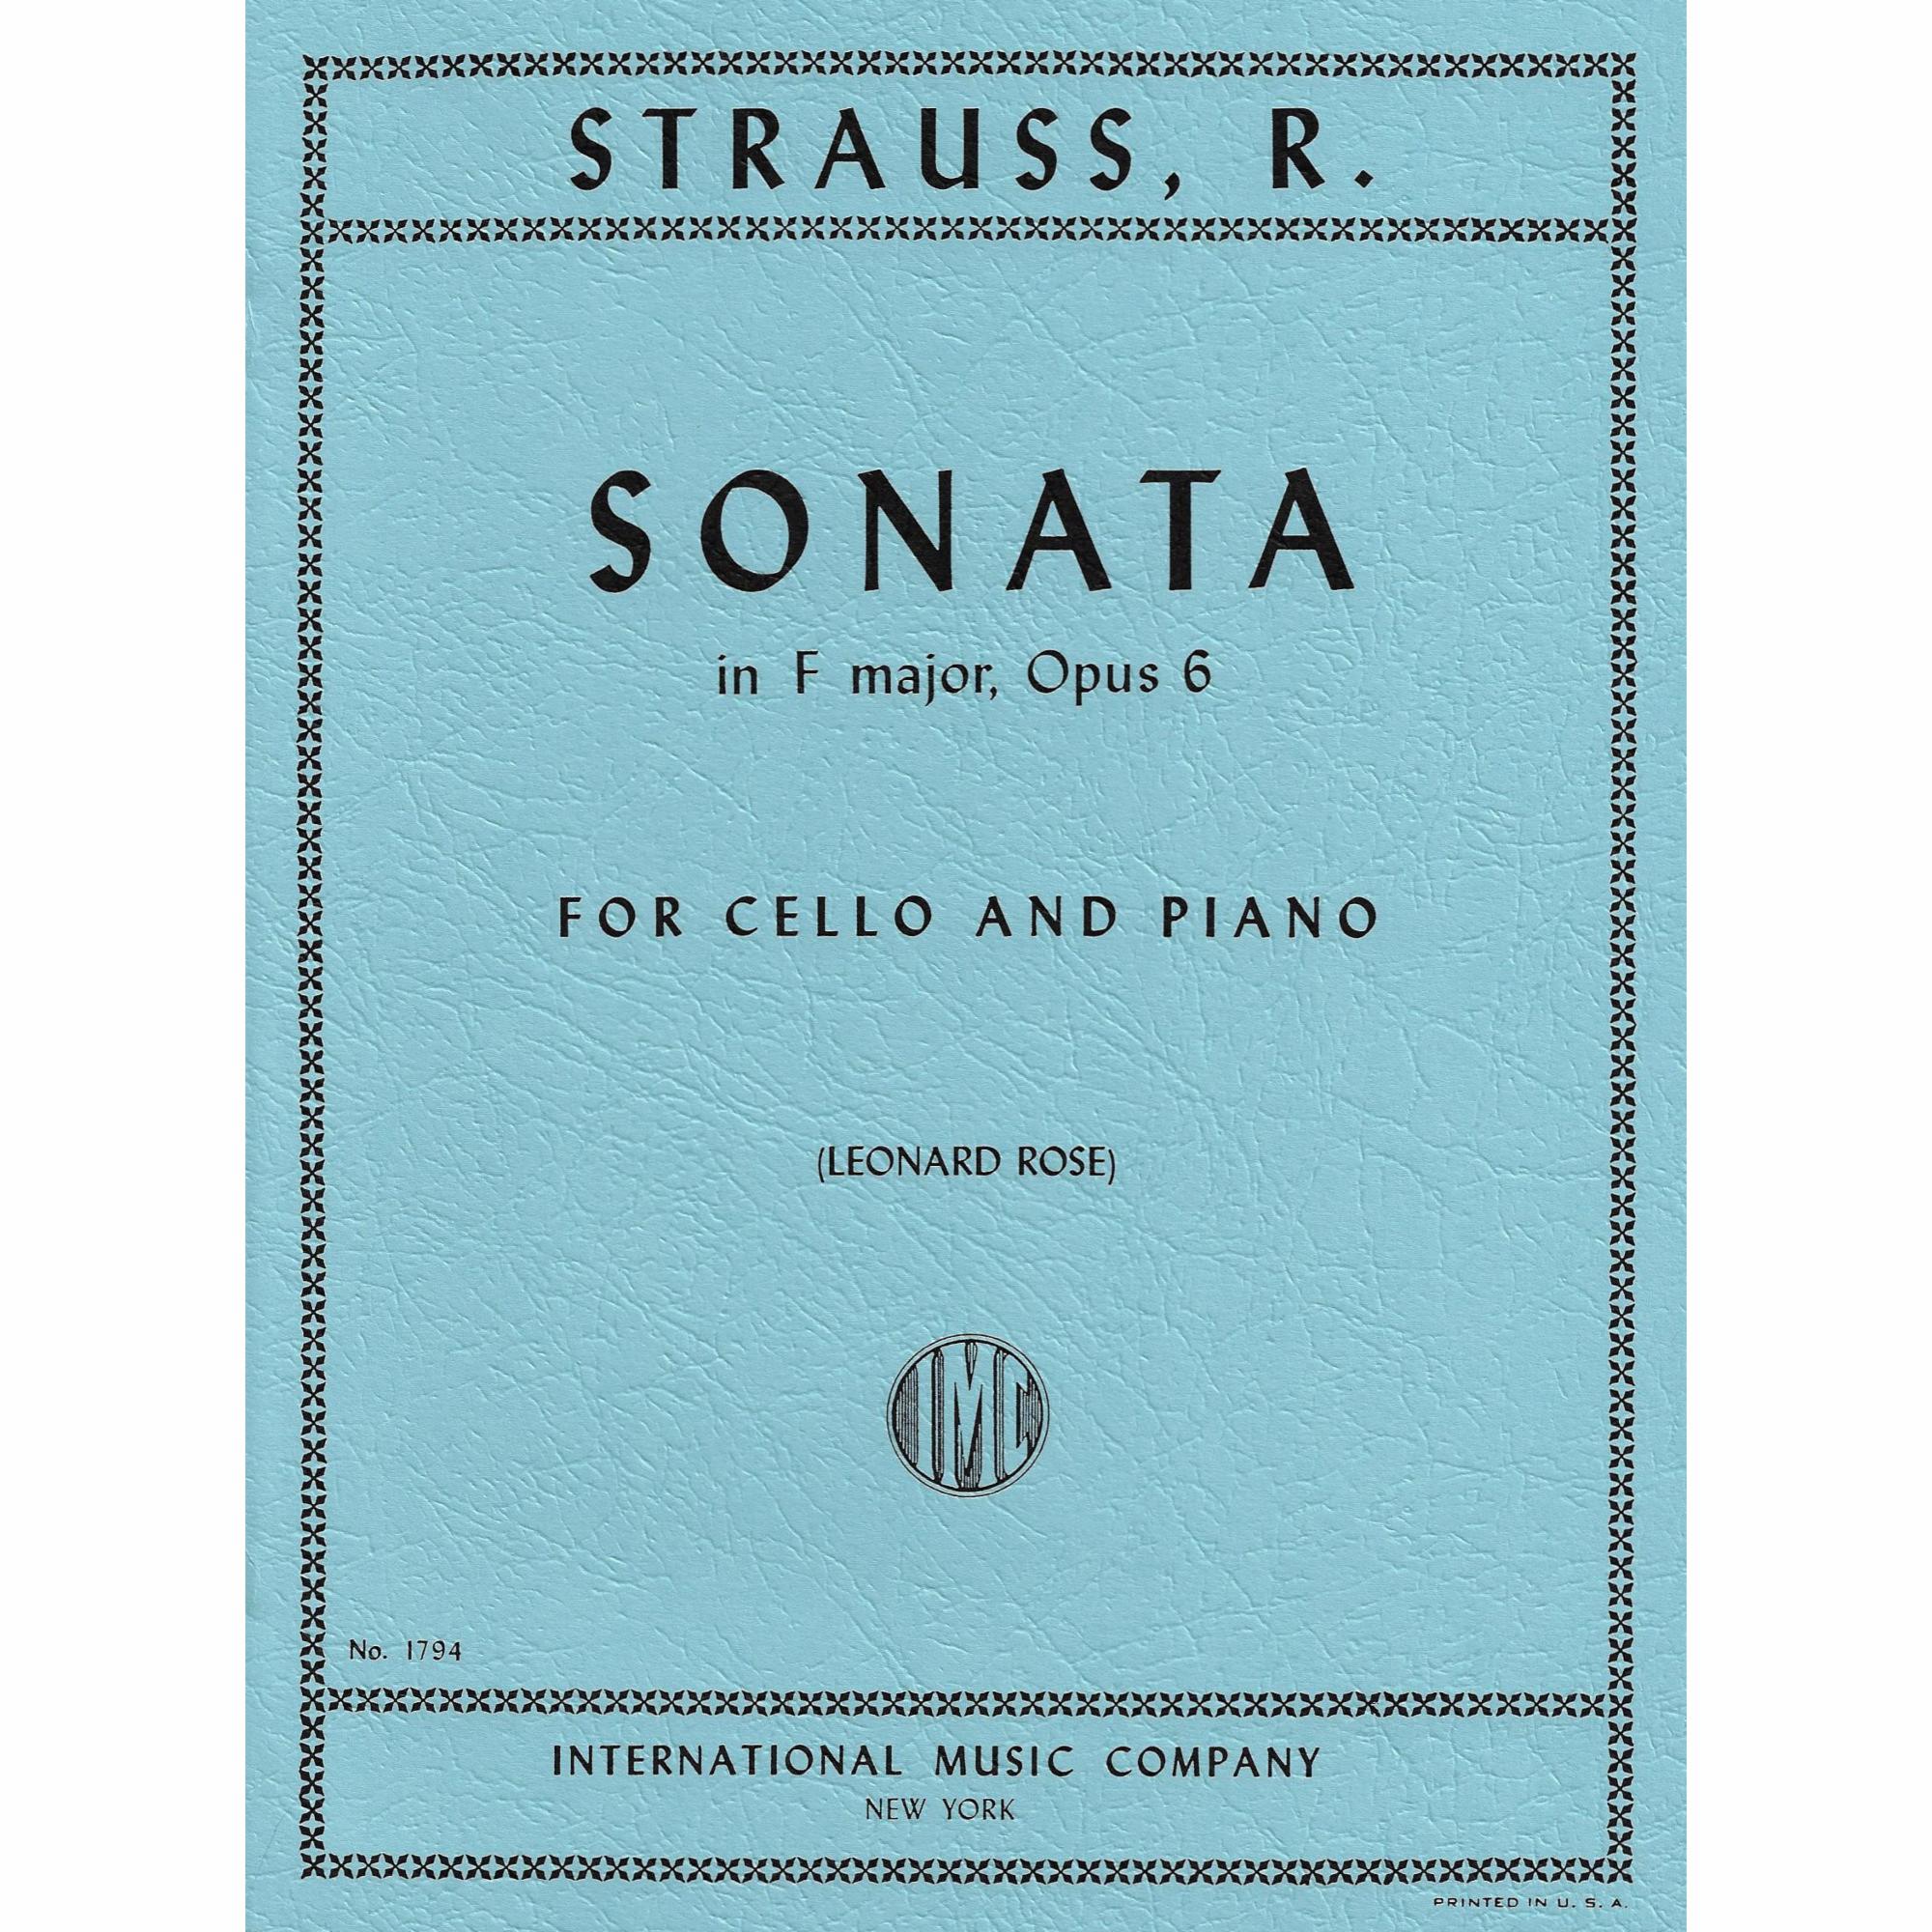 Strauss -- Sonata in F Major, Op. 6 for Cello and Piano